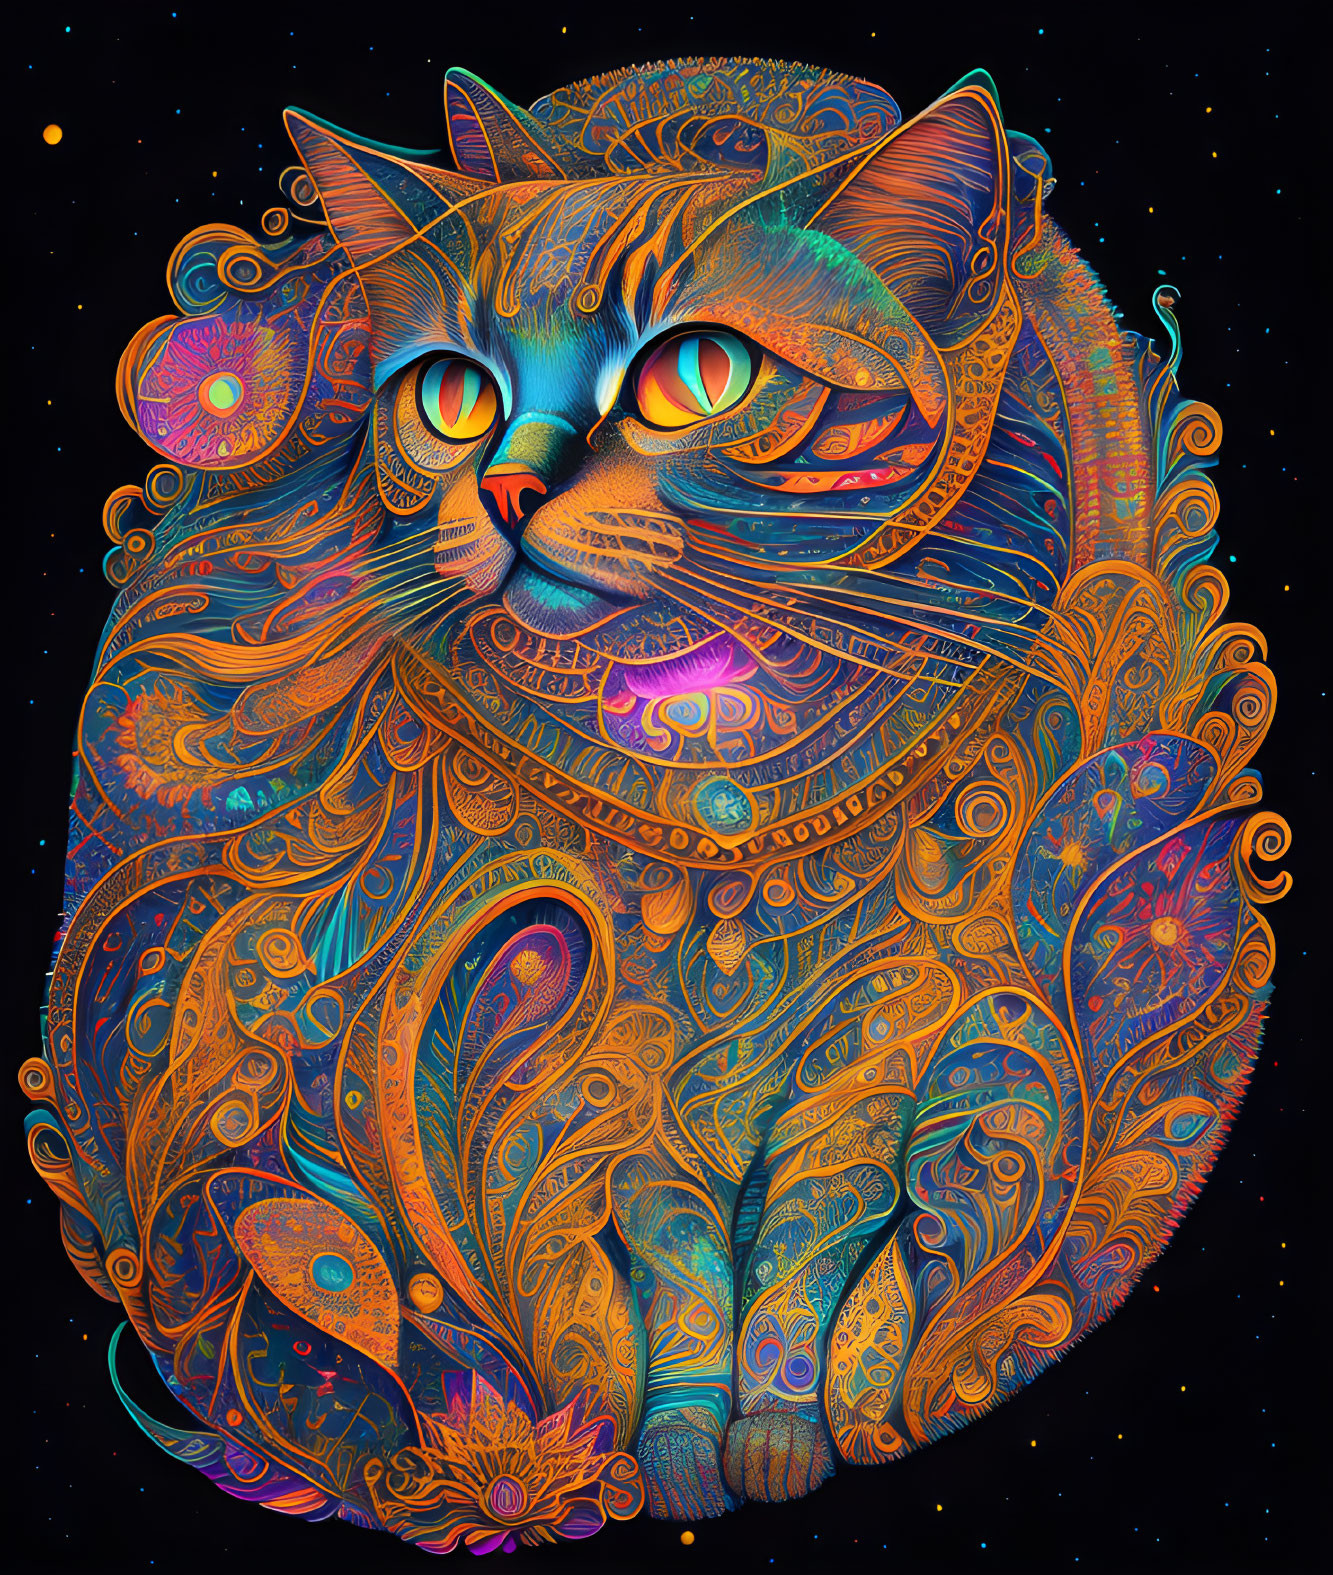 Colorful Psychedelic Cat Art with Swirls and Celestial Motifs